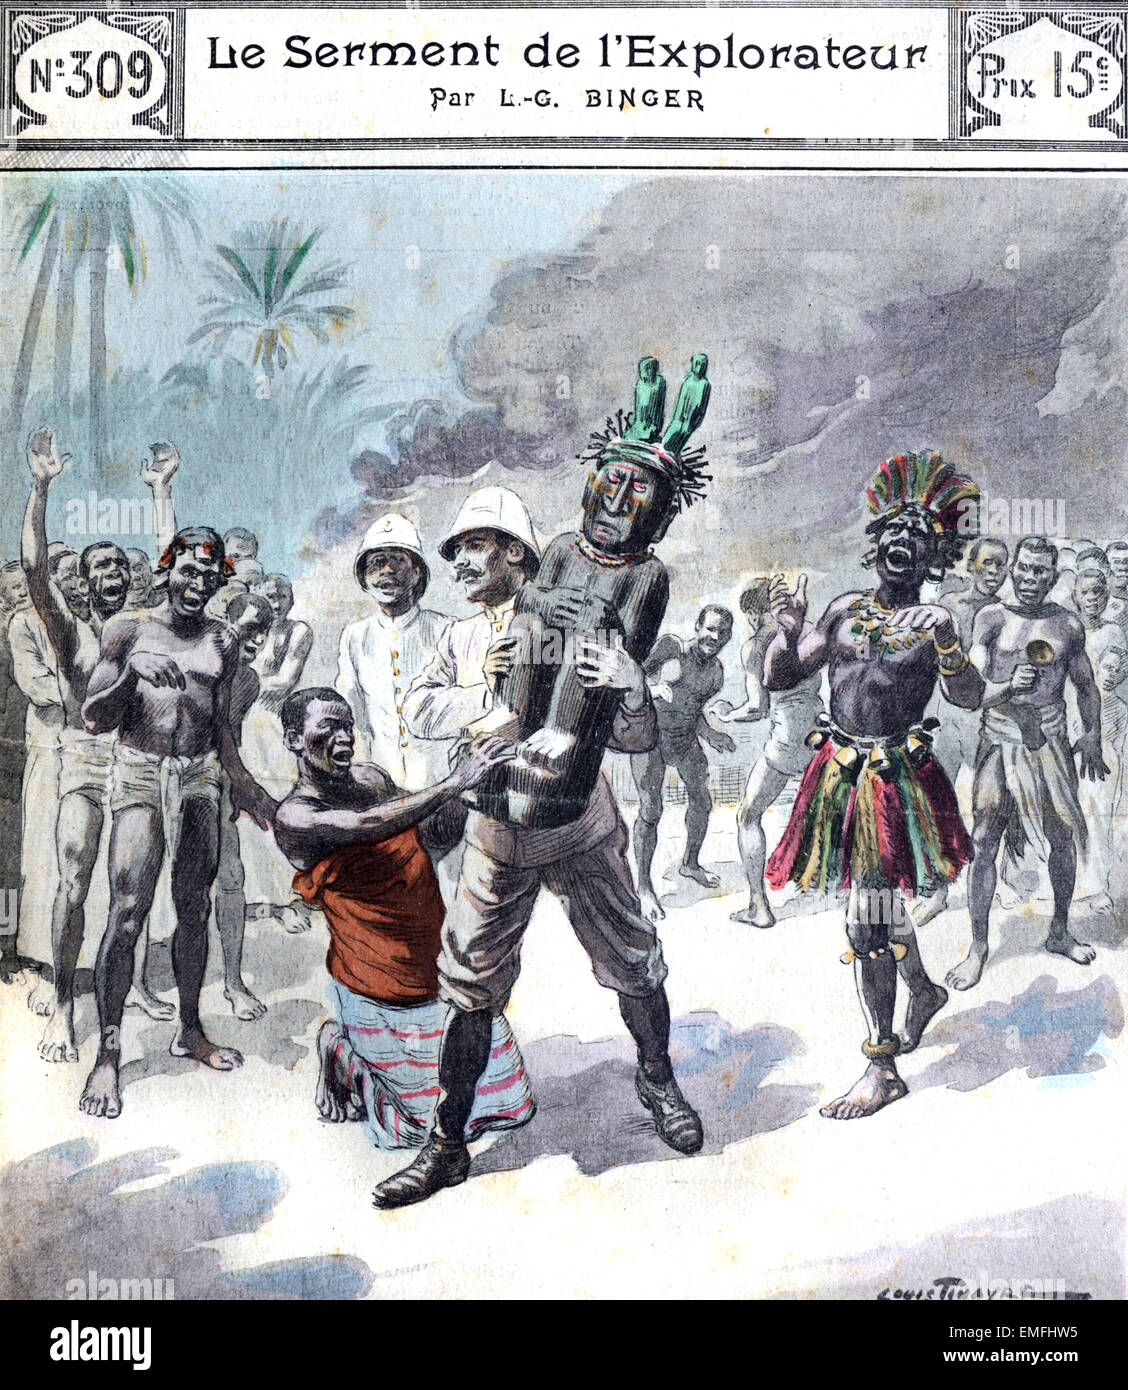 Christian Missionaries or European Explorers Preach Against Idolatry in French Colonial Africa 1902 Book Cover of a Short Story 'Le Serment de l'Explorateur' by L.G.Dinger. Stock Photo